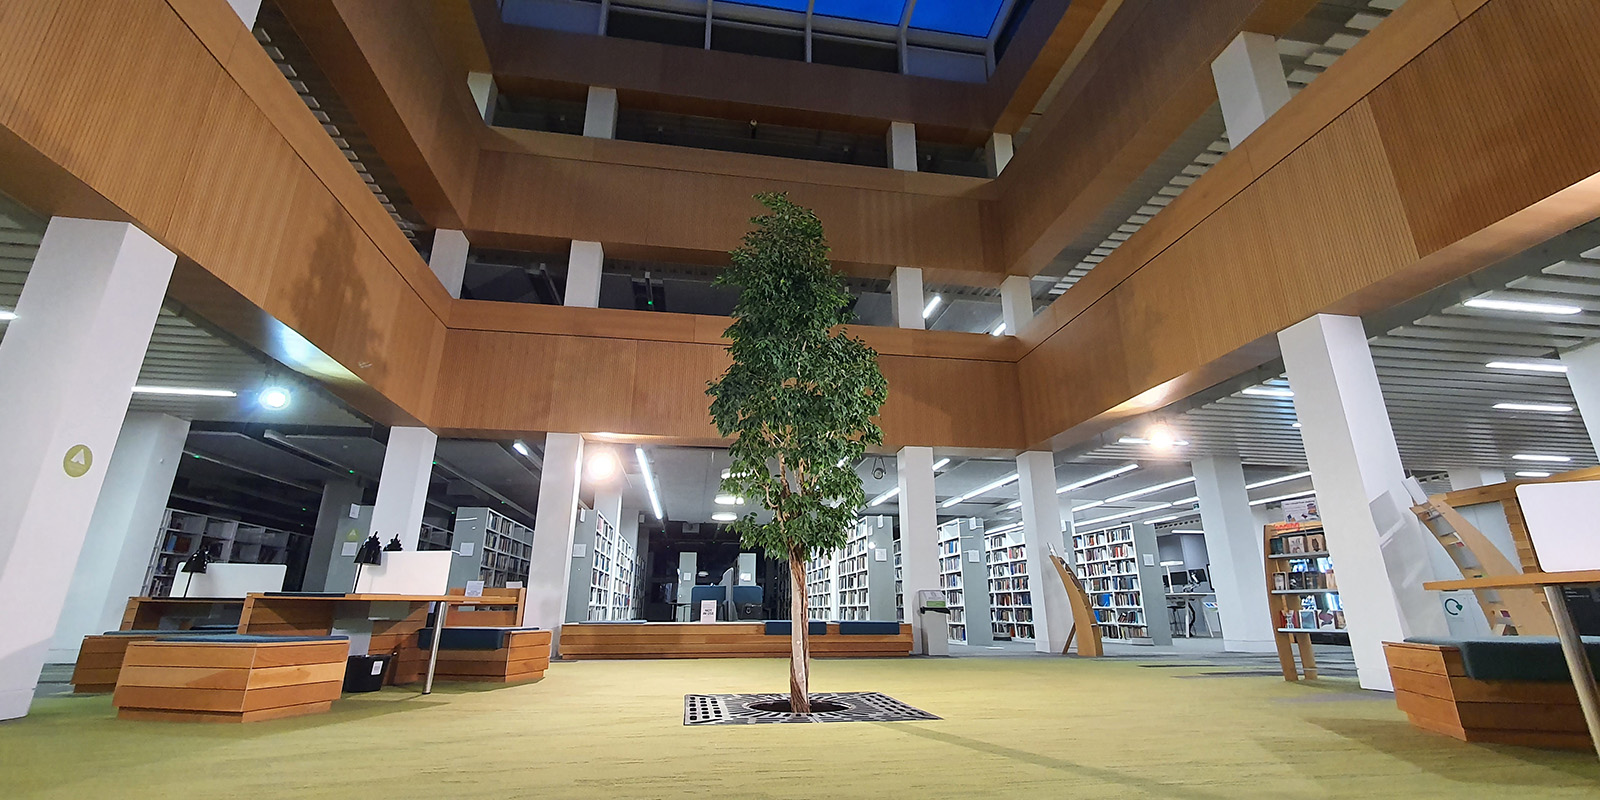 Ҵúmv library foyer with the living tree in the centre.